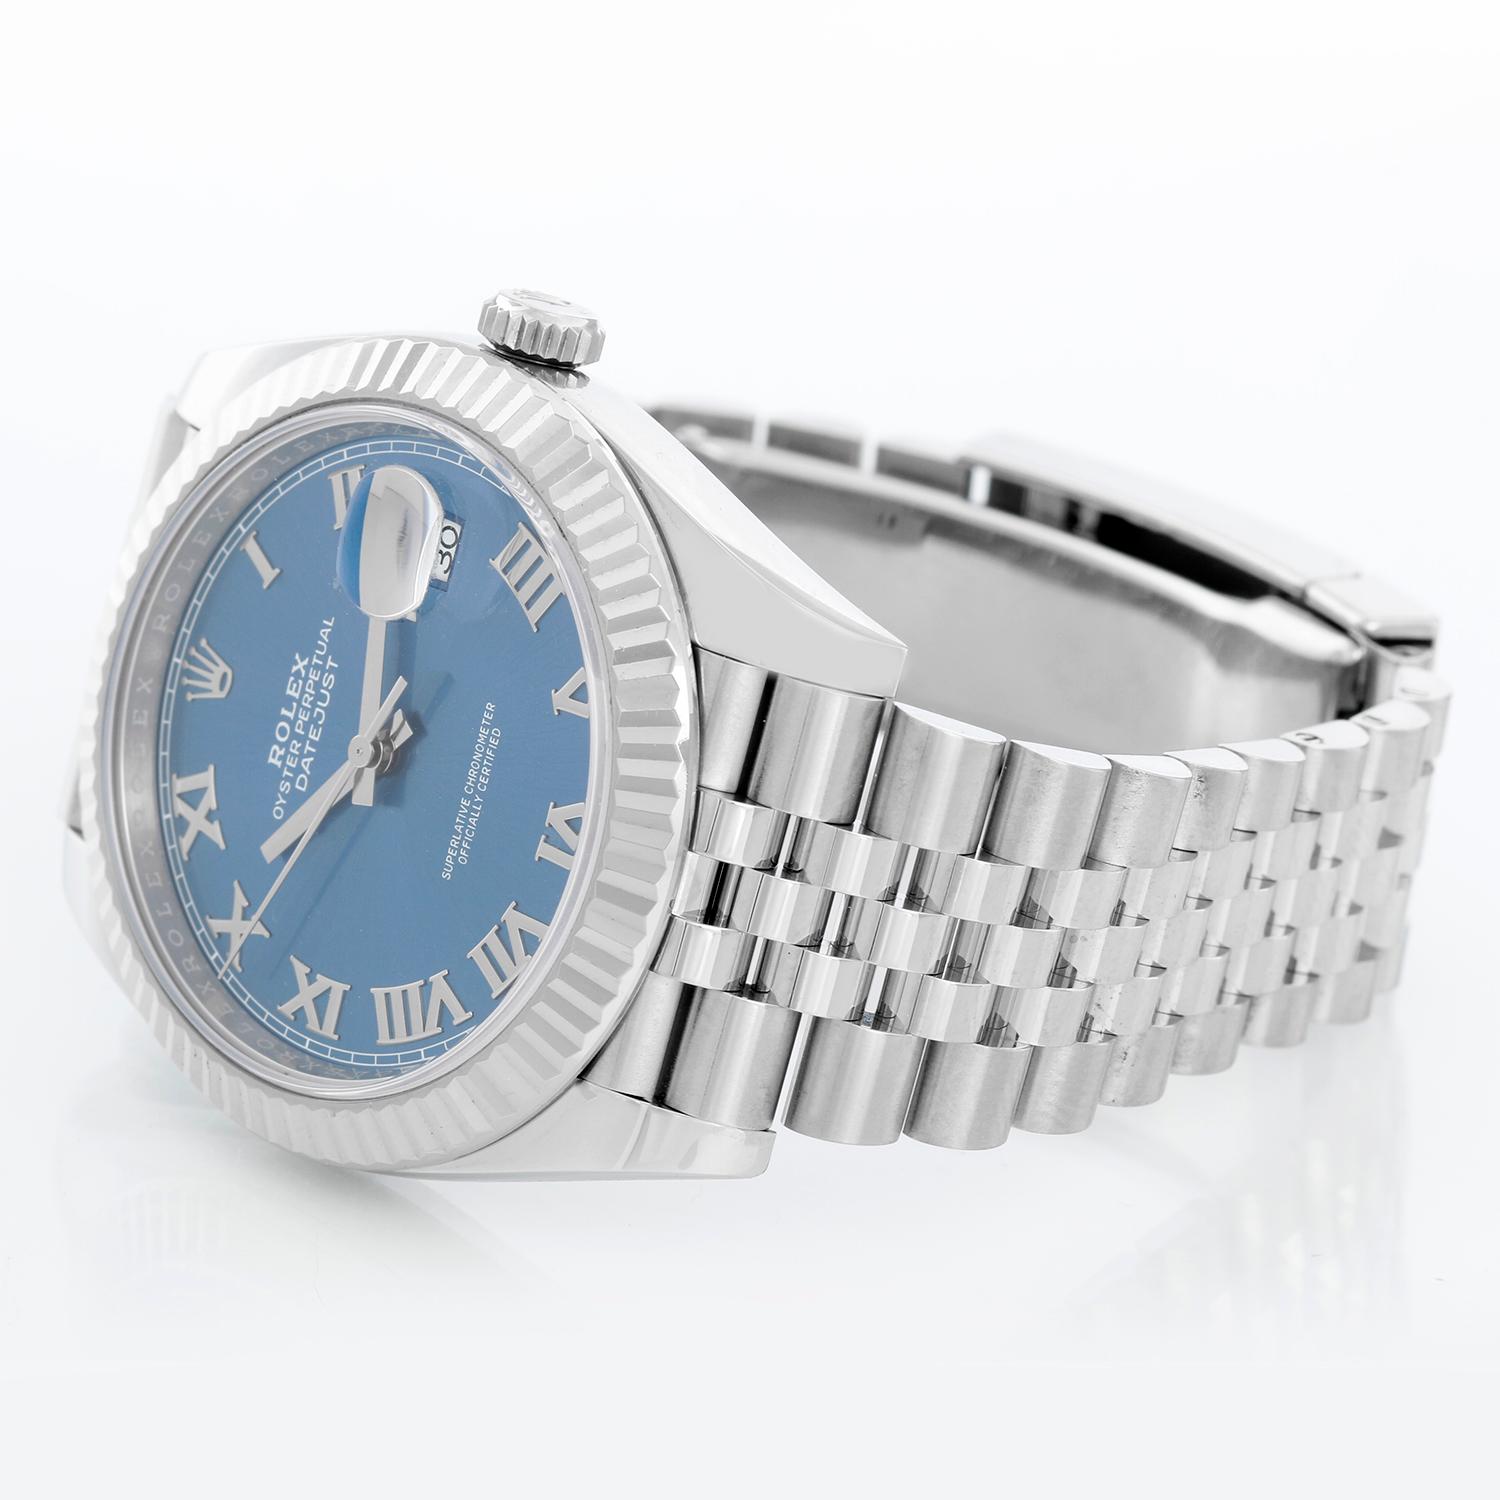 Rolex Datejust 41  Stainless Steel Men's Blue Roman Watch 126334 - Automatic winding, Quickset, sapphire crystal. Stainless steel case with 18k white gold fluted bezel  (41mm diameter). Blue Roman dial. Stainless steel oyster bracelet. Pre-owned